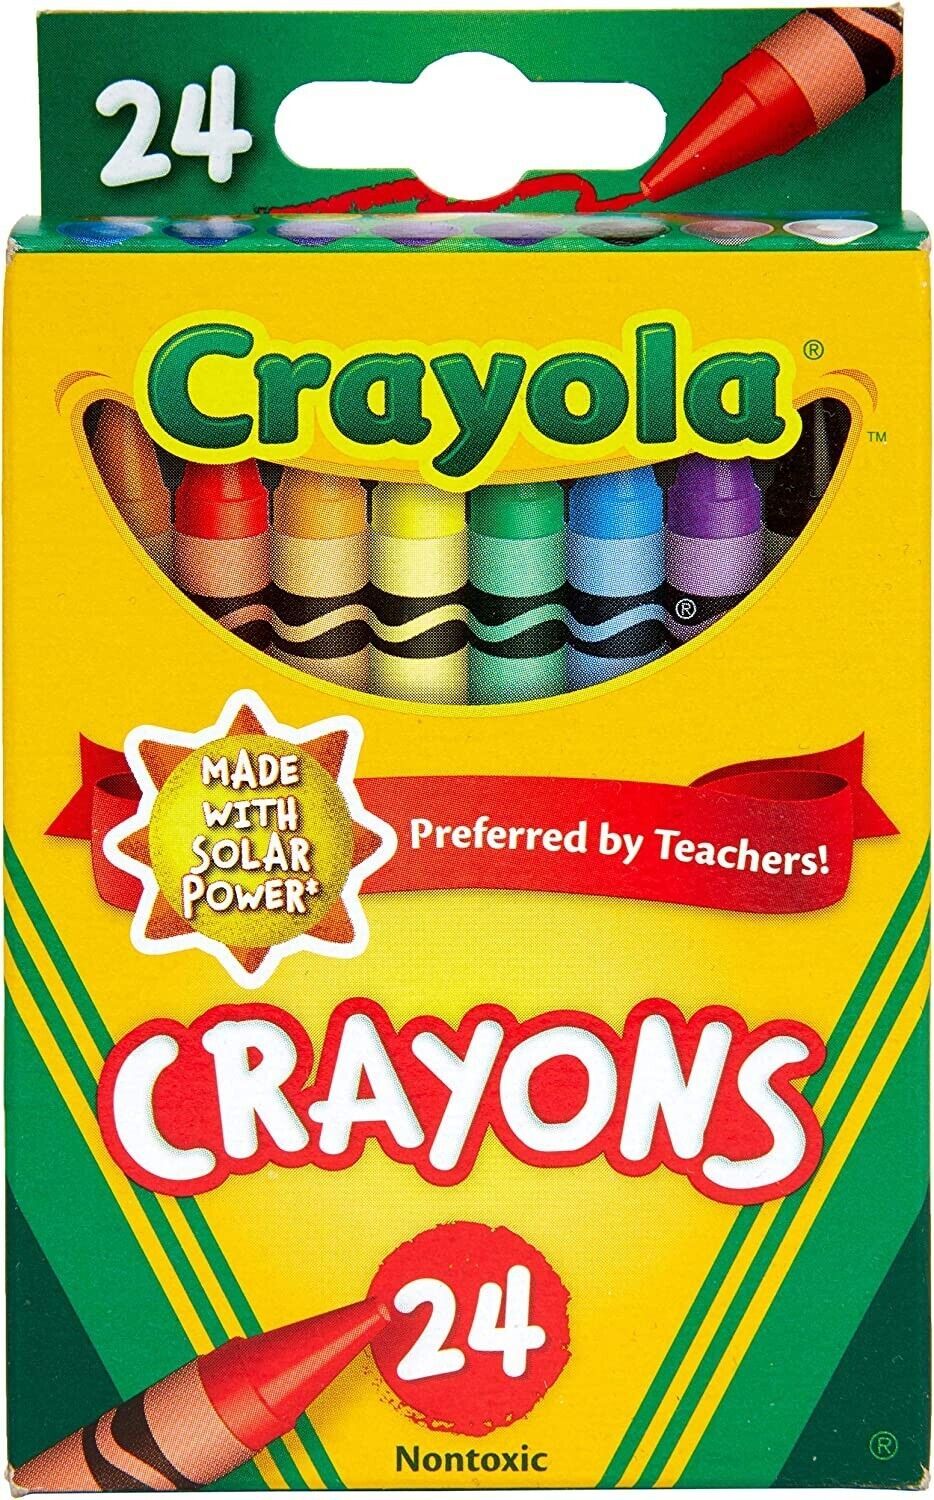 Crayola Classic Crayons, Assorted Colors, Back to School, 24 Count - $8.15